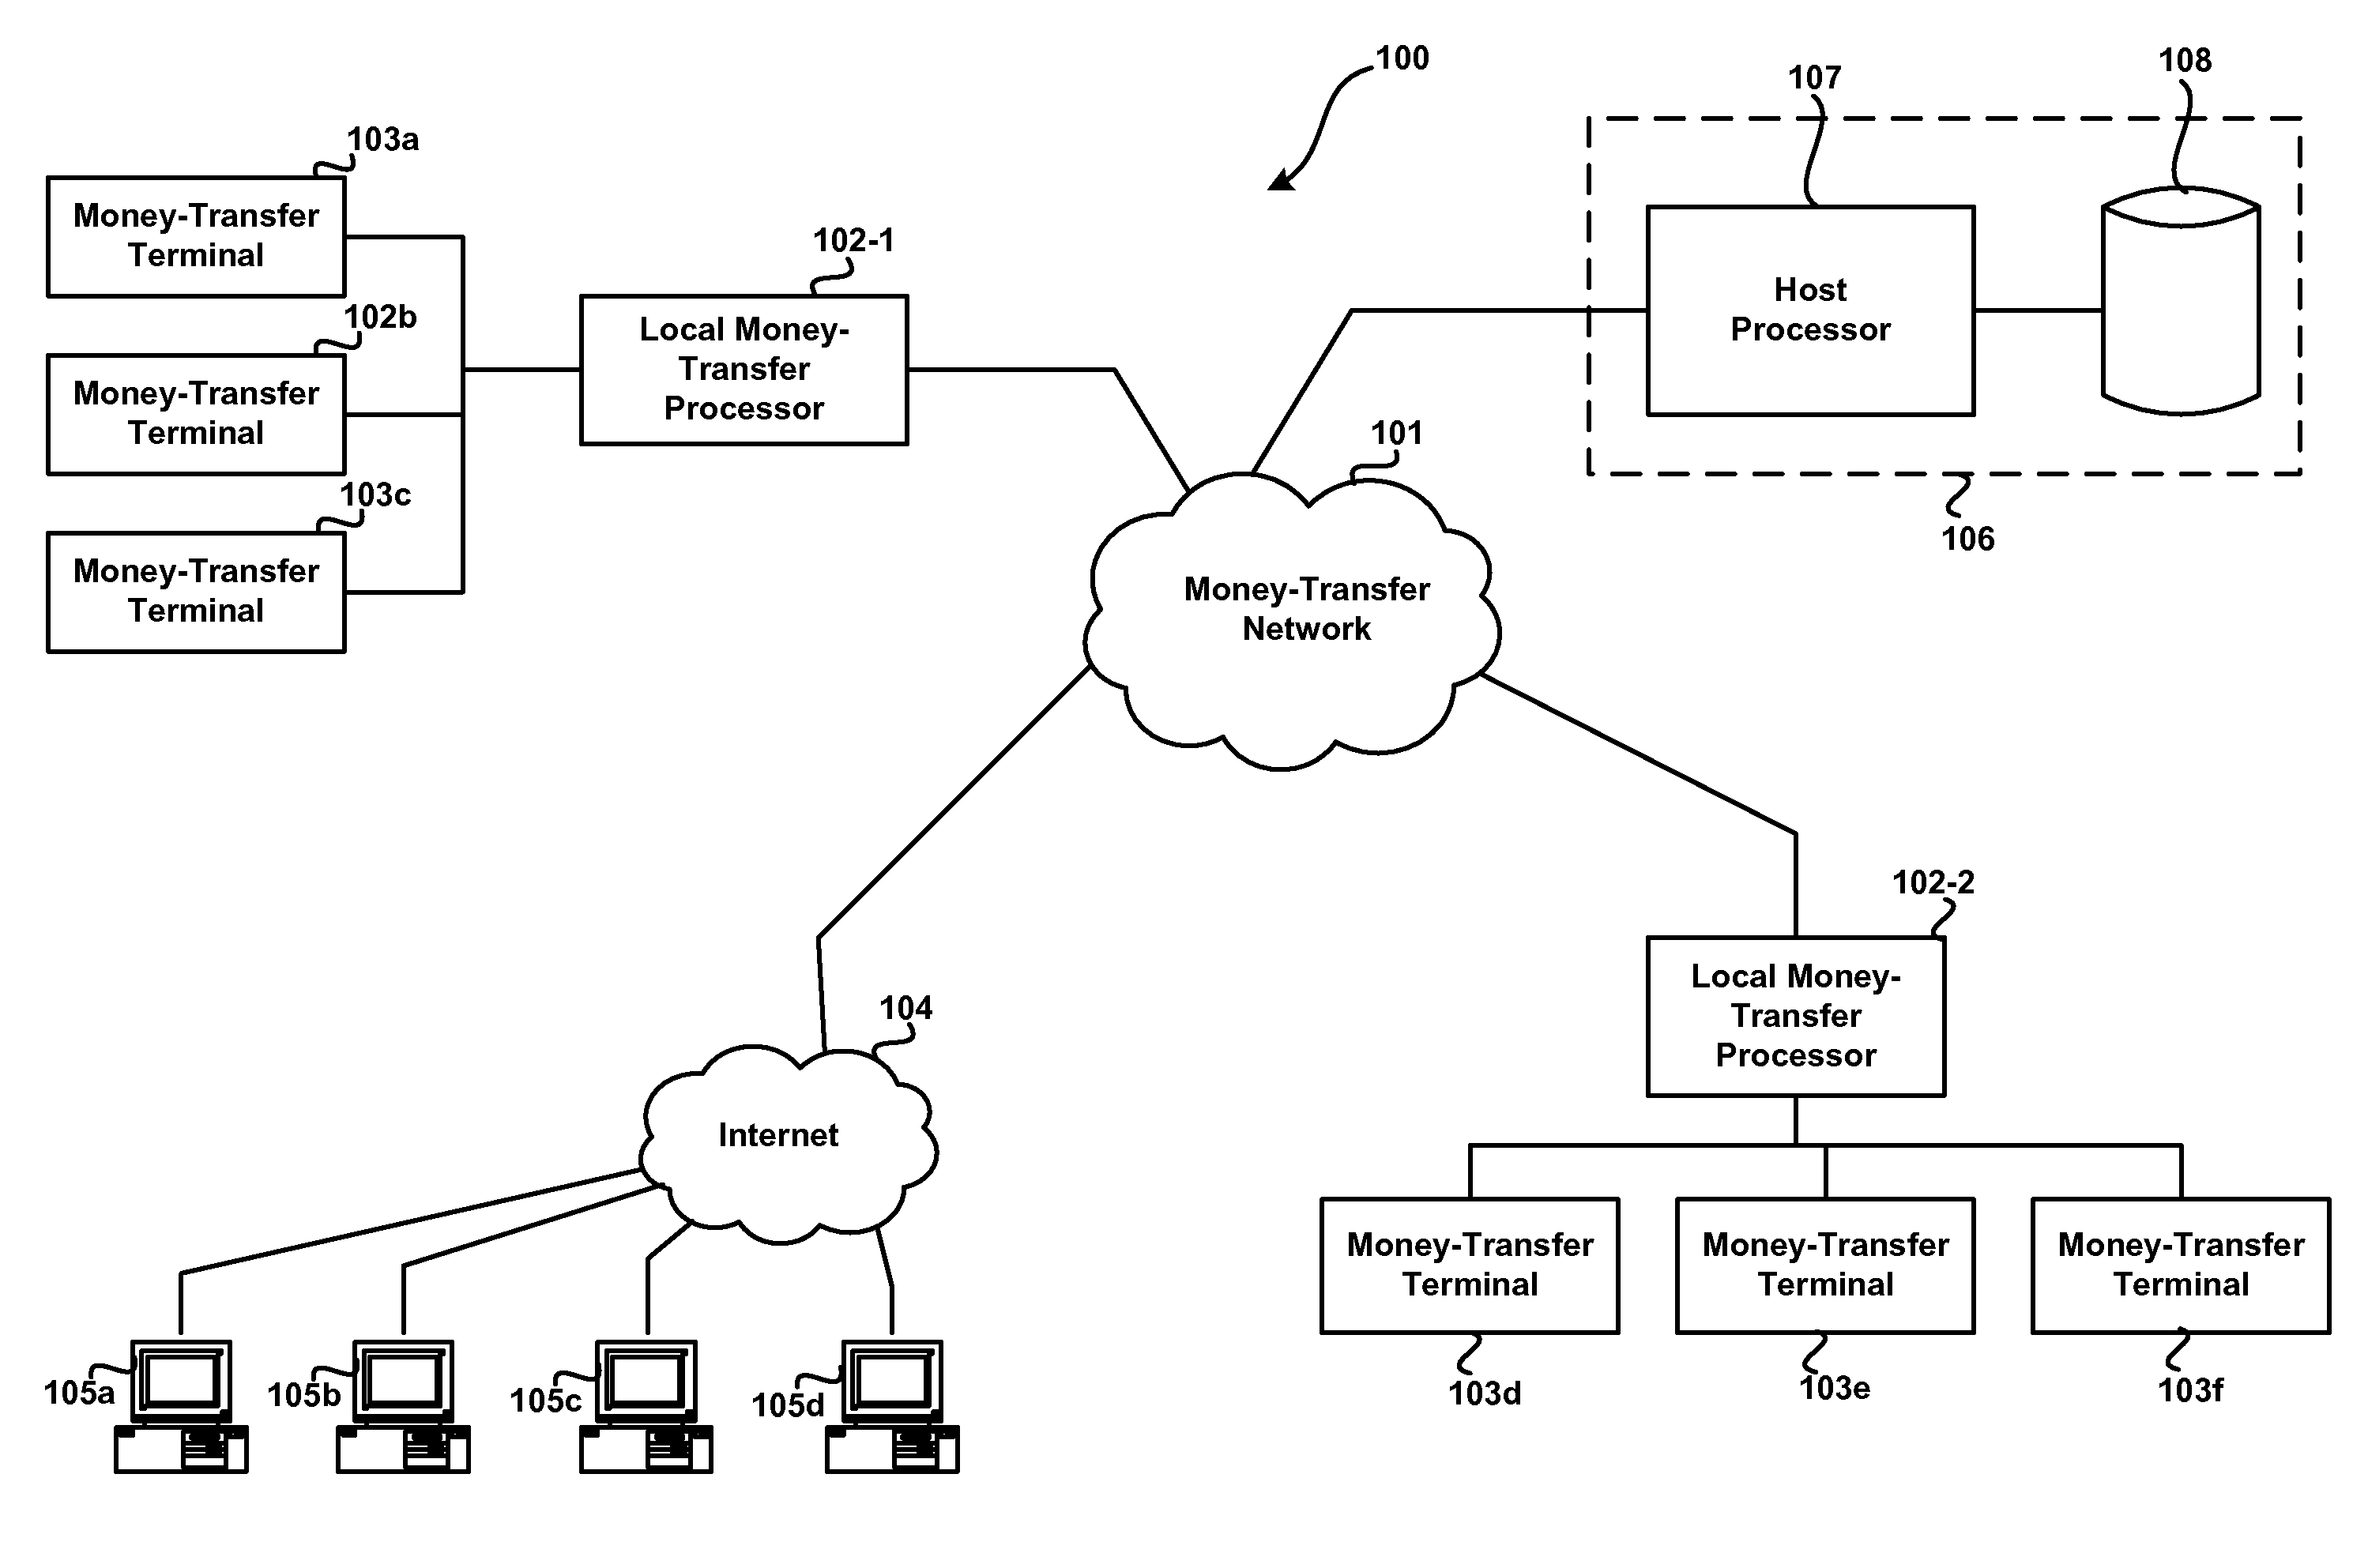 Methods and systems for executing a plurality of money transfers having a fluctuating parameter